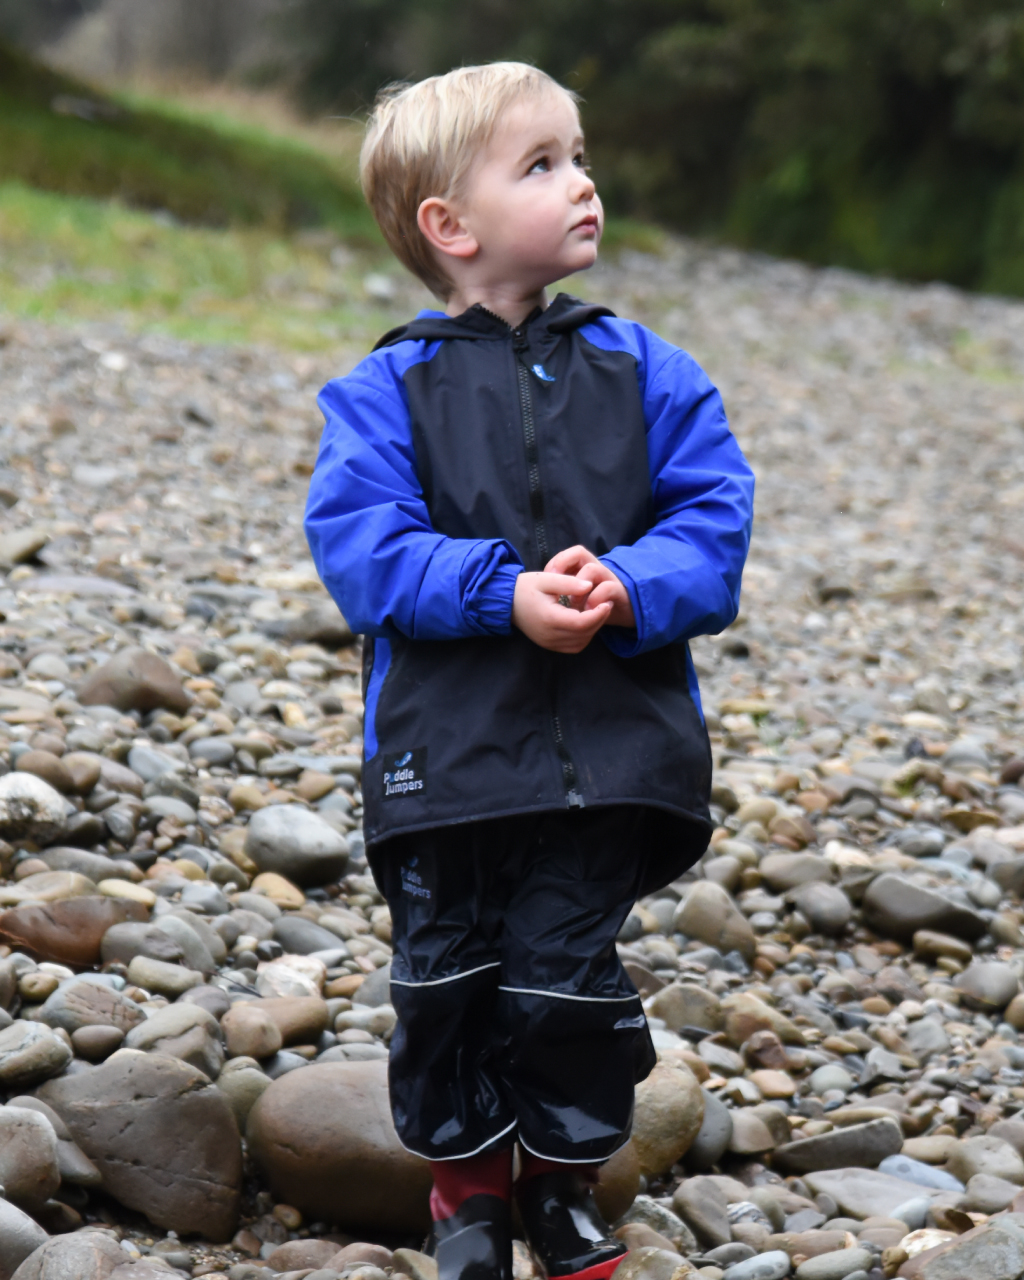 Microfleece Lined Jacket v2 - Royal/Navy - Kids Outdoor Clothing NZ ...